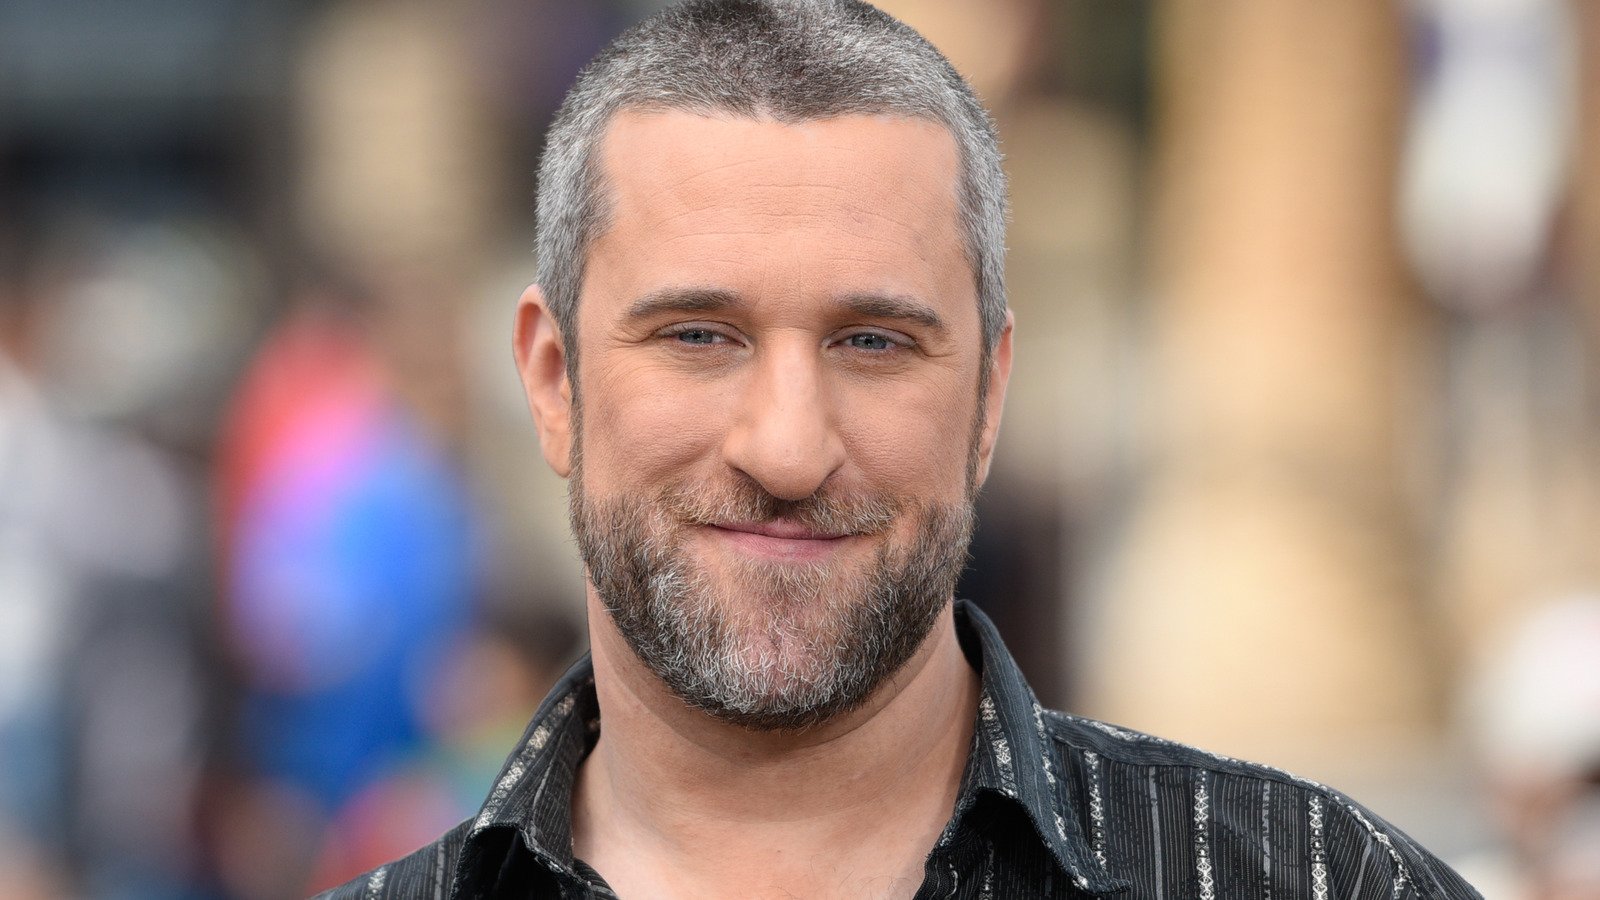 Dustin Diamond's Heart-Wrenching Final Wishes Revealed